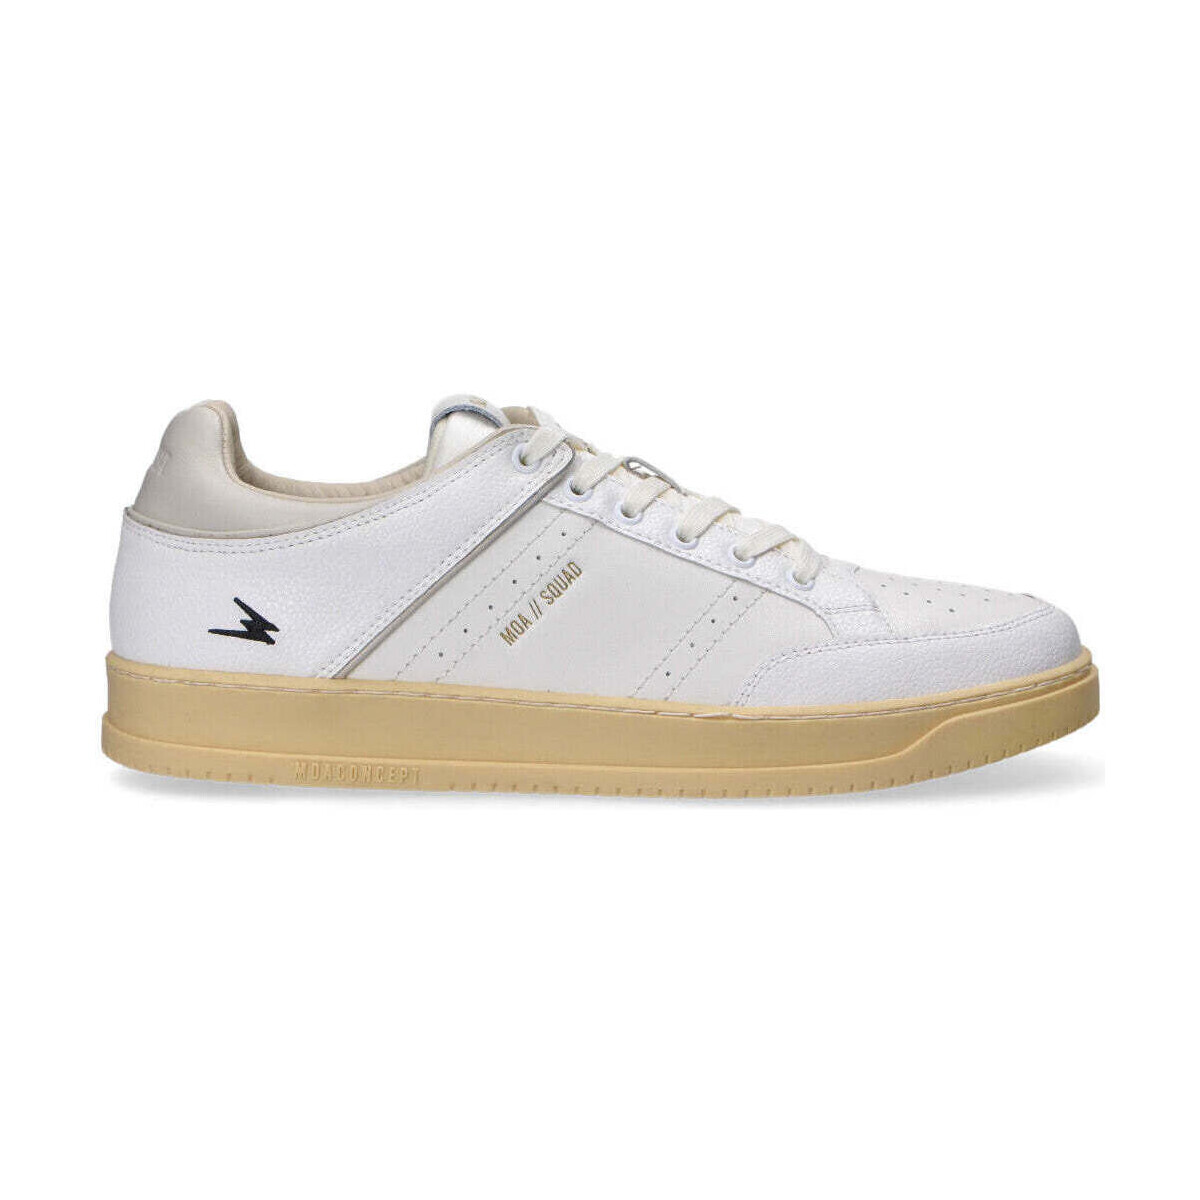 Chaussures Homme Baskets basses Moaconcept  Blanc